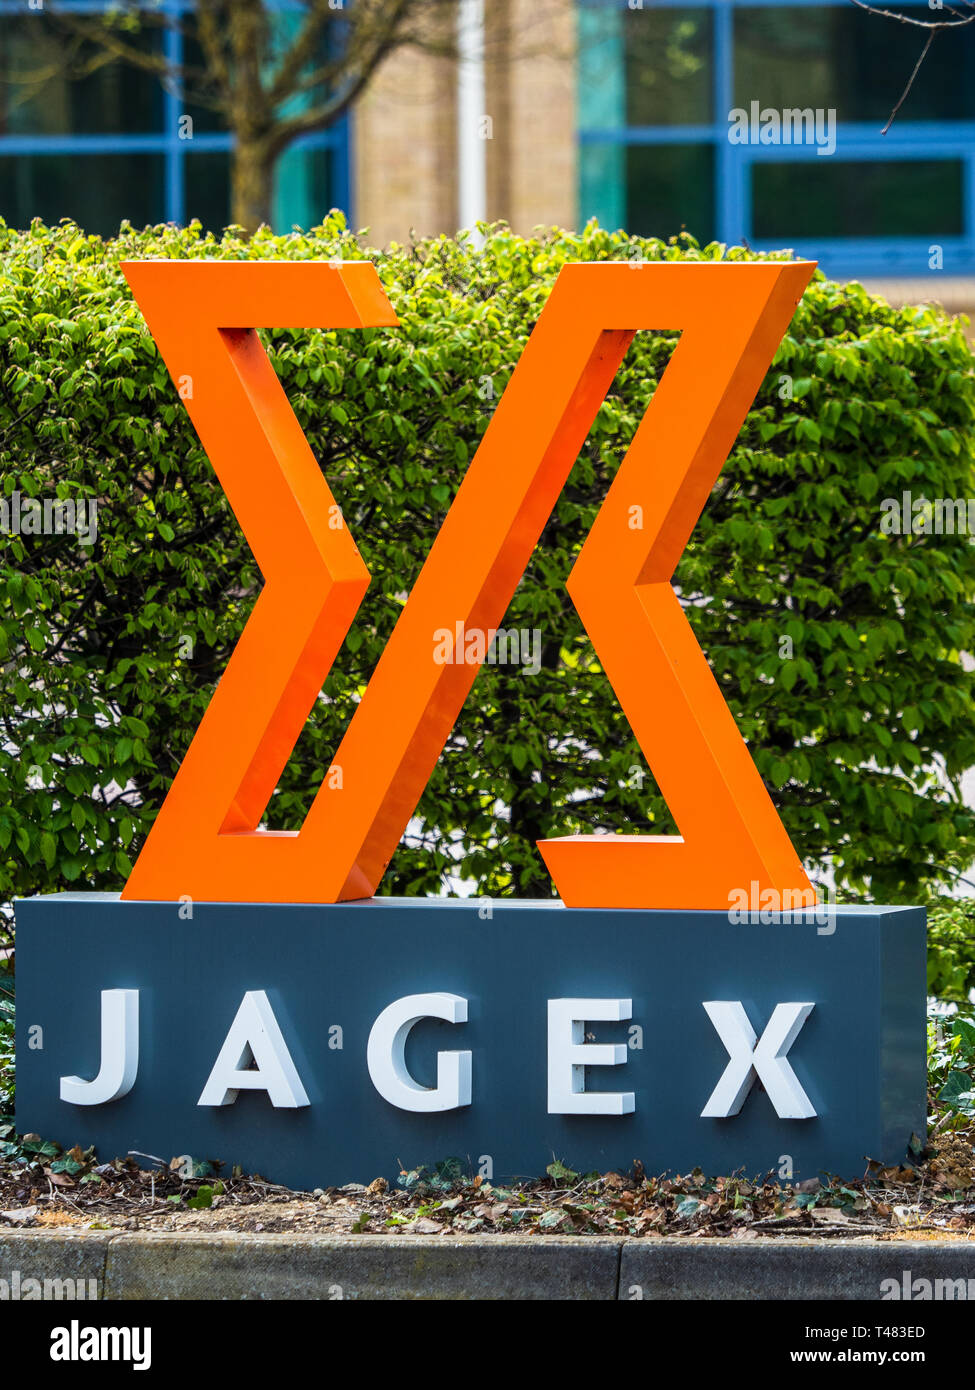 Jagex Gaming Company HQ Cambridge Science Park - Jagex is an interactive gaming company employing 350 people in Cambridge UK, known for Runescape. Stock Photo